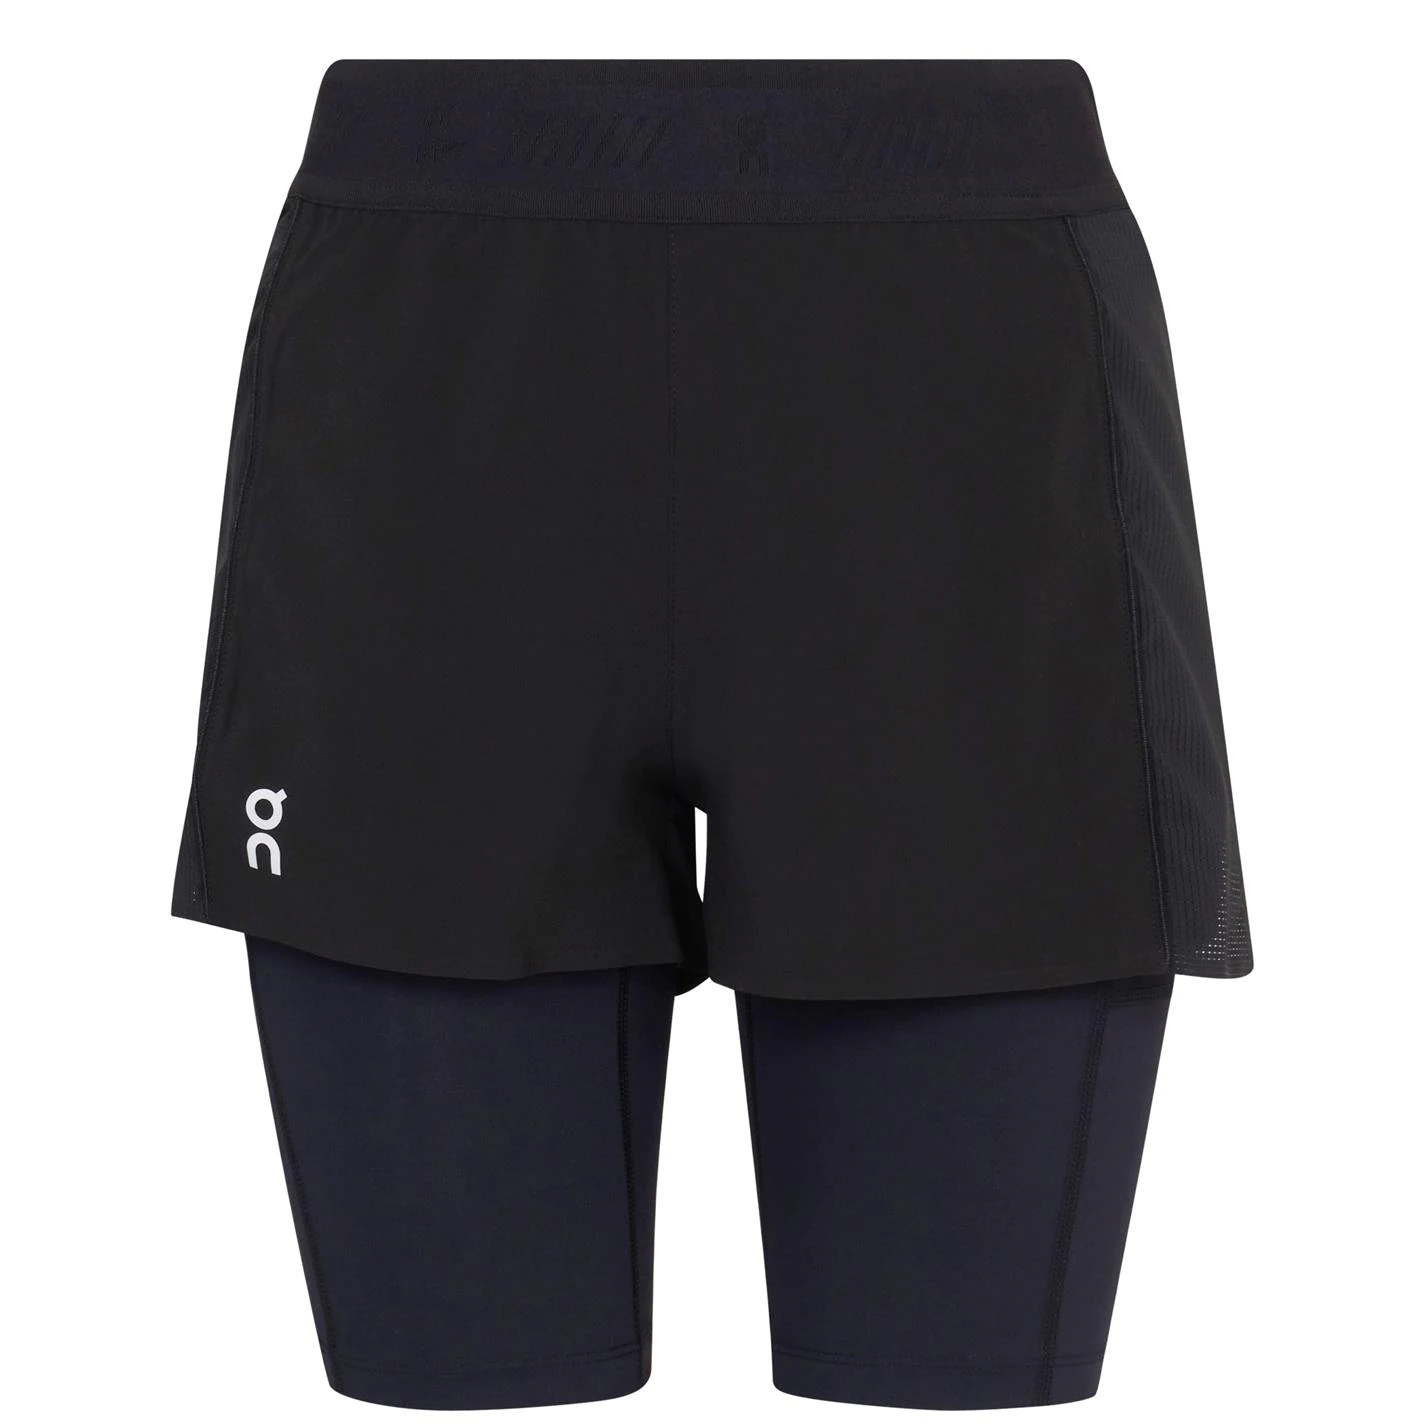 ACTIVE SHORTS 2 IN 1 - 1